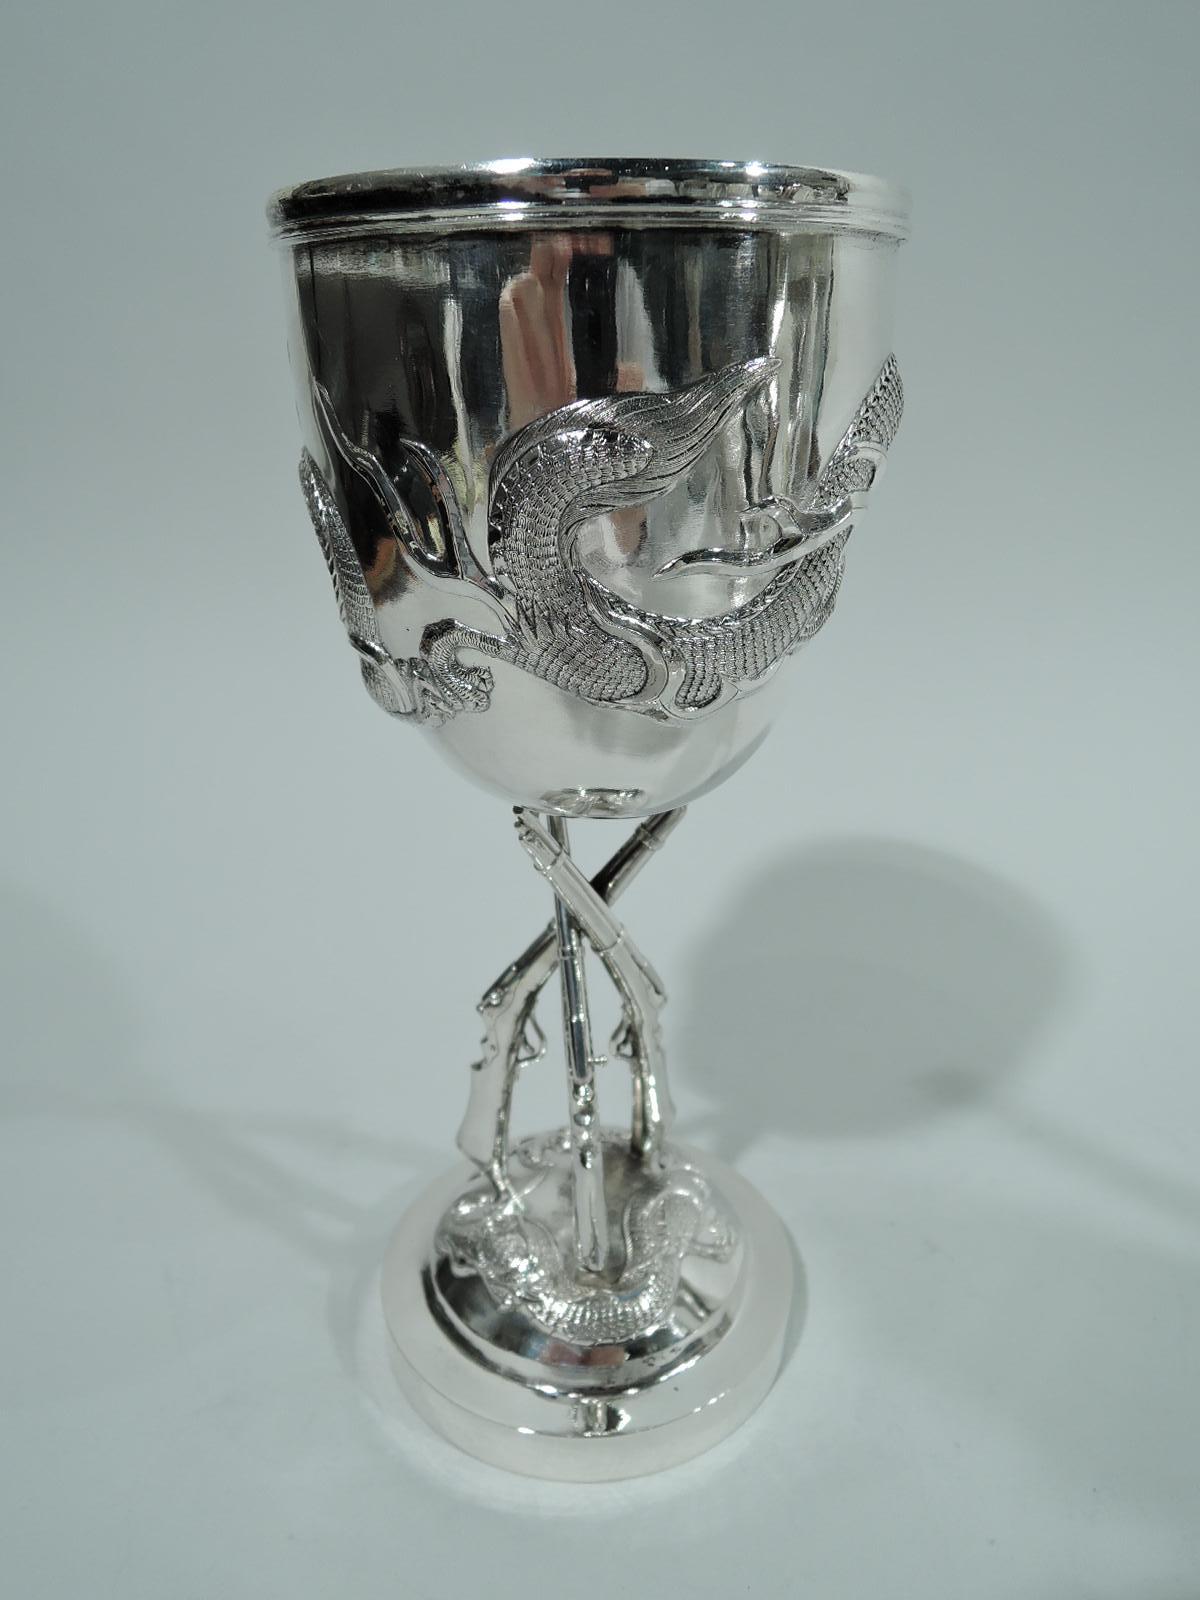 Turn-of-the-century Chinese silver goblet. Ovoid bowl with horned and scaly wraparound dragon in relief, and applied circular frame (vacant). Bowl rests on 3-gun shaft in turn mounted to domed foot with second dragon. An unusual design evocative of